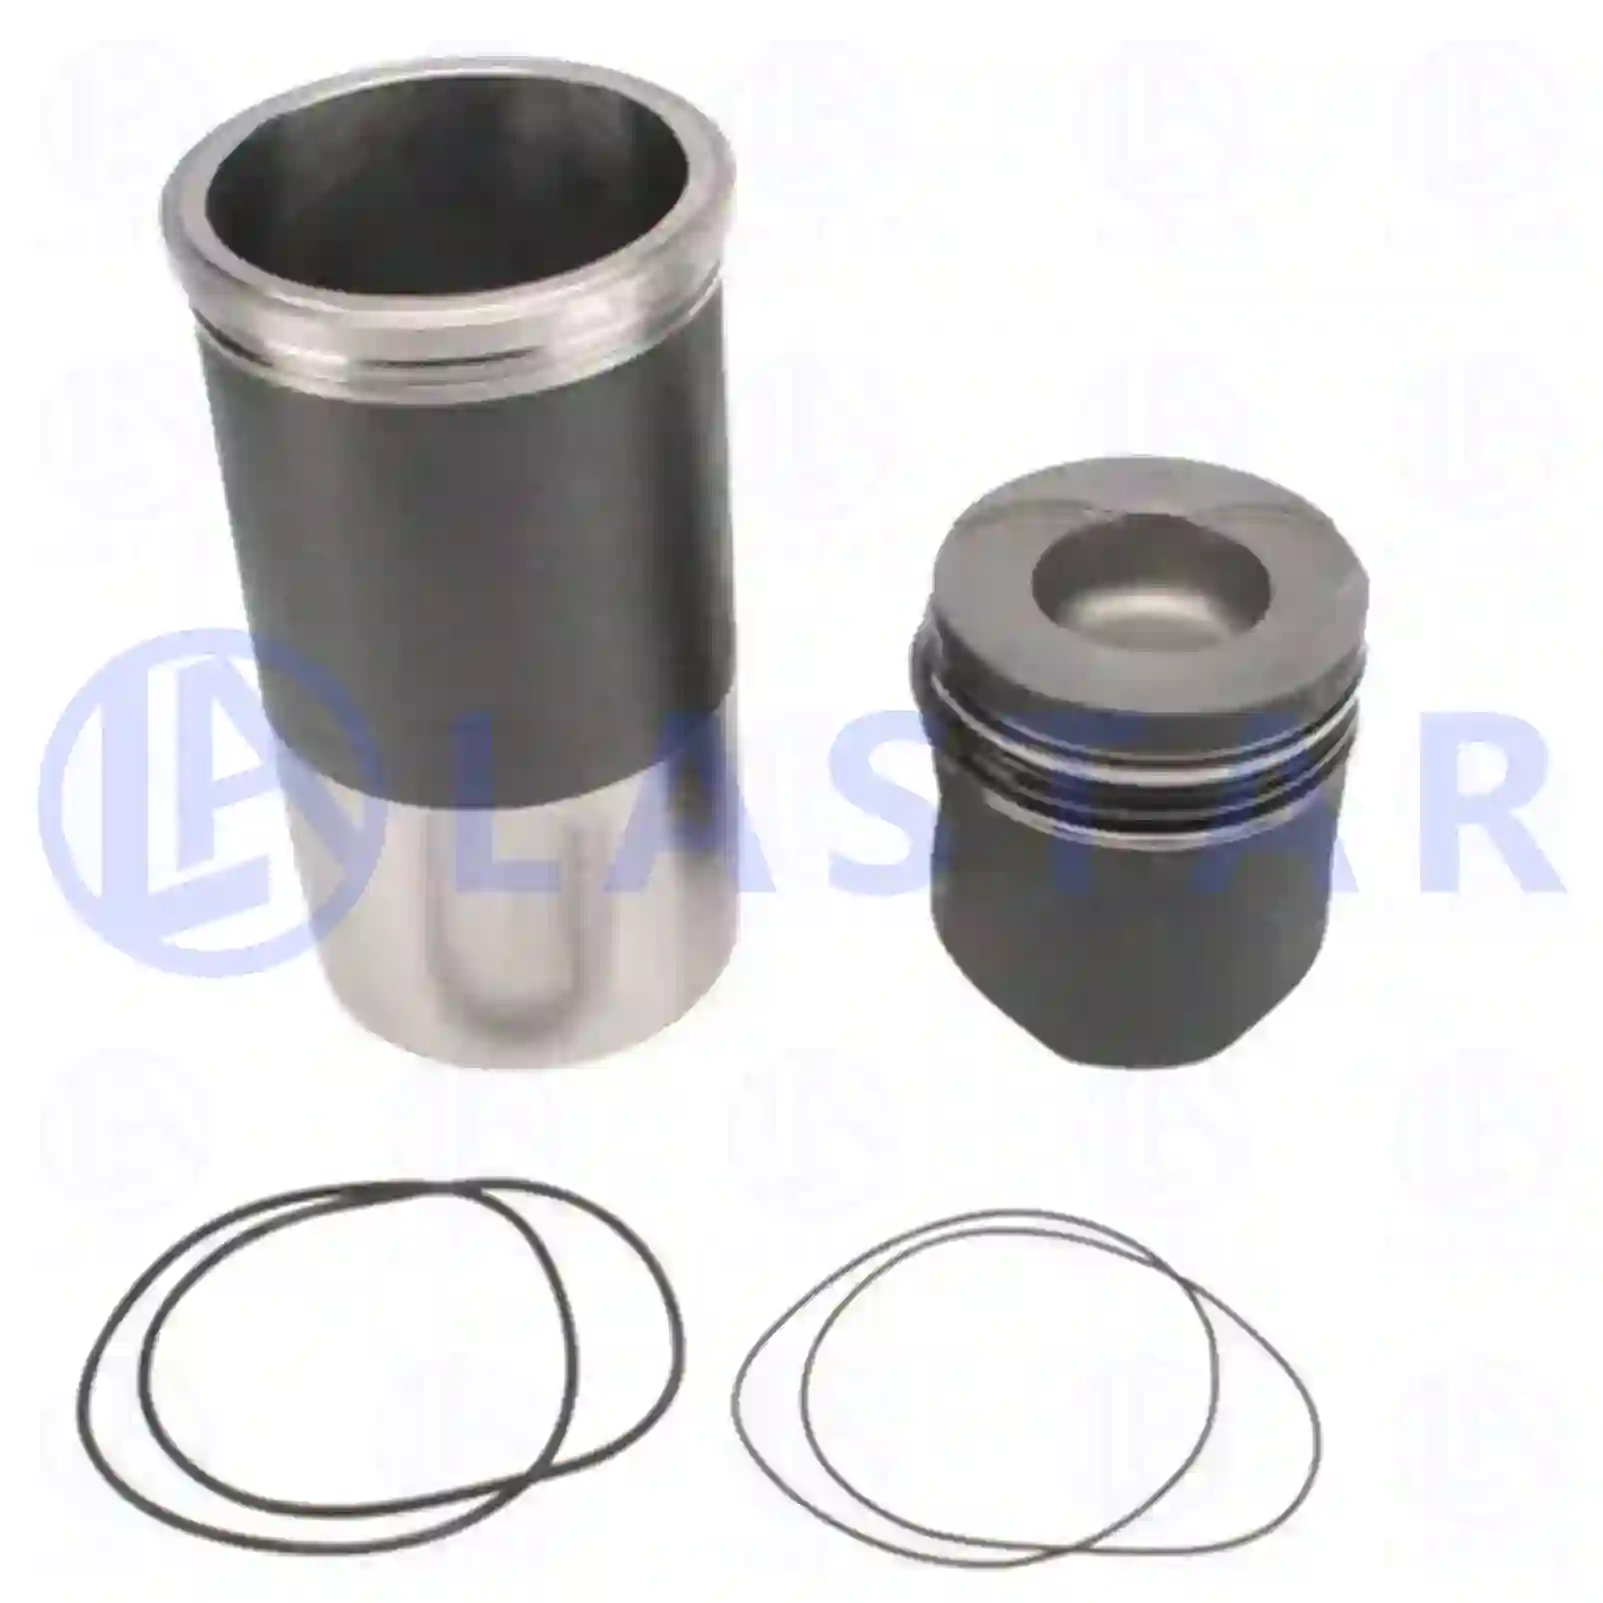 Piston with liner, 77700998, 51025017638, 5102 ||  77700998 Lastar Spare Part | Truck Spare Parts, Auotomotive Spare Parts Piston with liner, 77700998, 51025017638, 5102 ||  77700998 Lastar Spare Part | Truck Spare Parts, Auotomotive Spare Parts